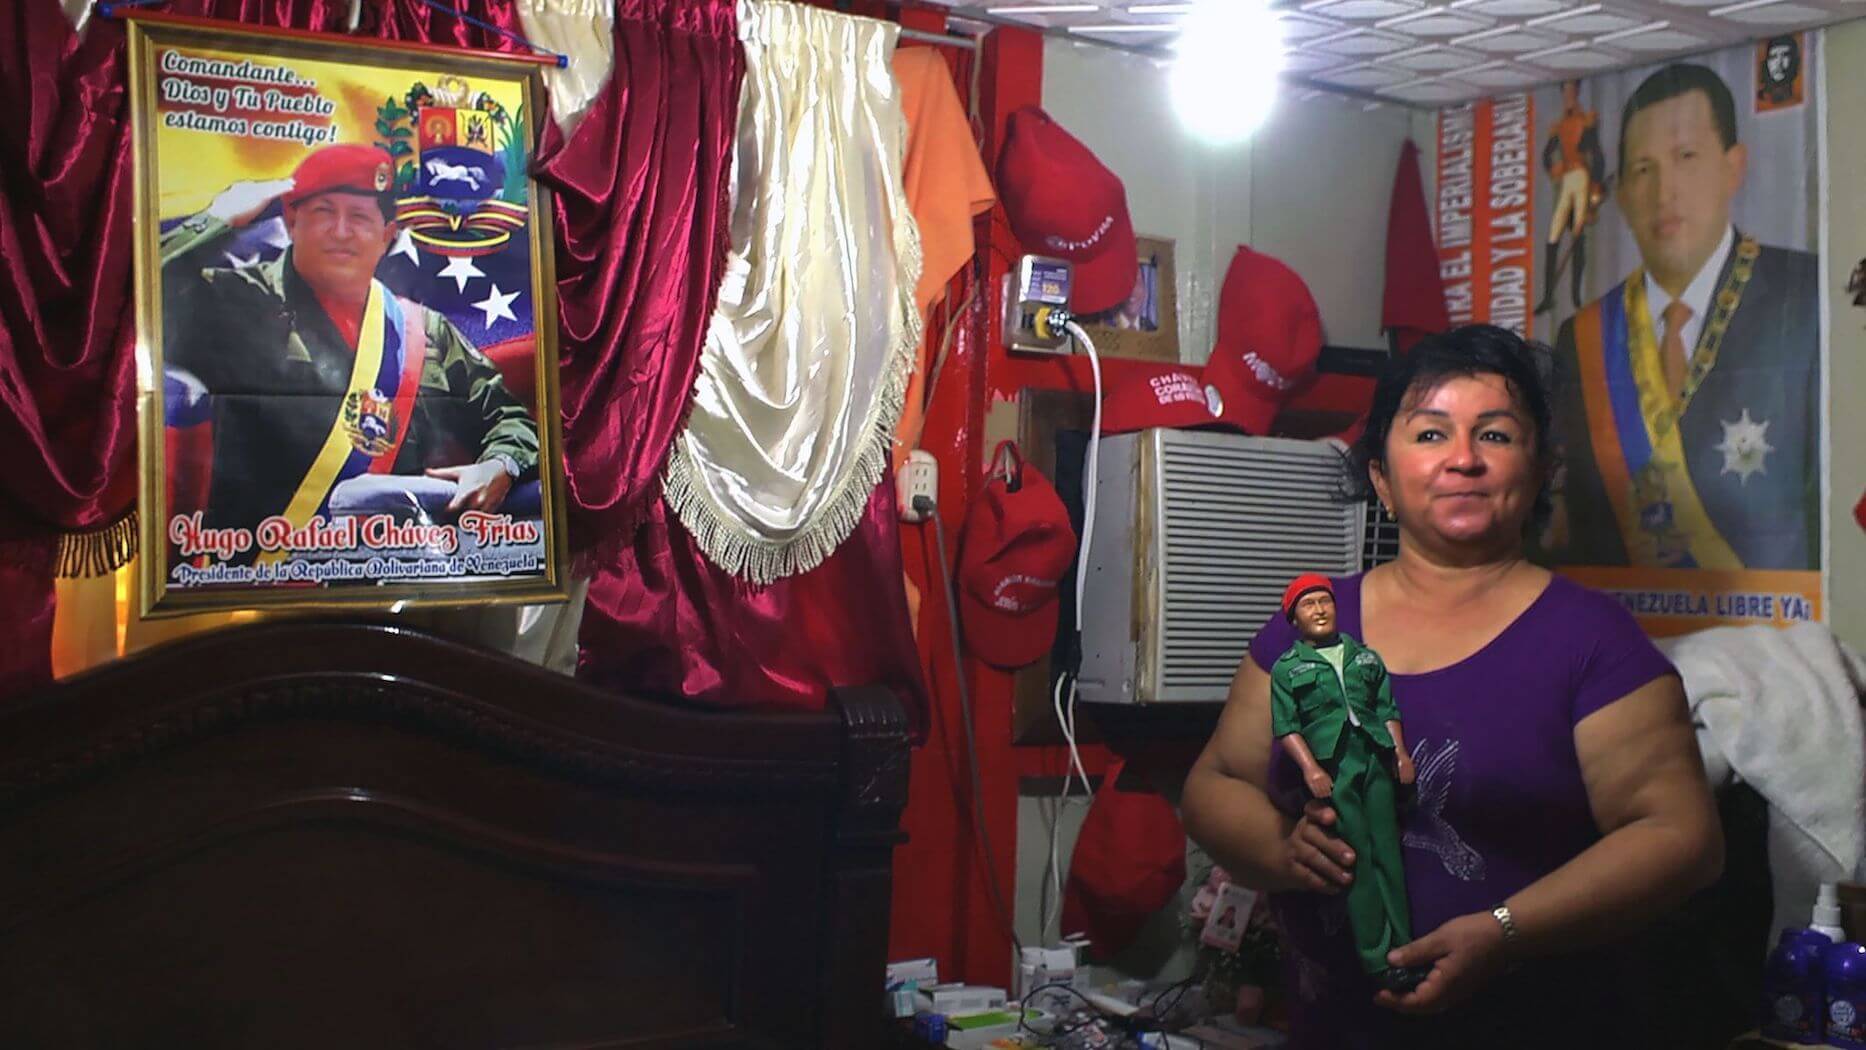 Still from Once Upon a Time in Venezuela. A woman stands in the corner of a room by a bed and window air conditioner unit. She is surrounded by political pictures of and merchandise, holding a political figurine of Cesar Chavez.